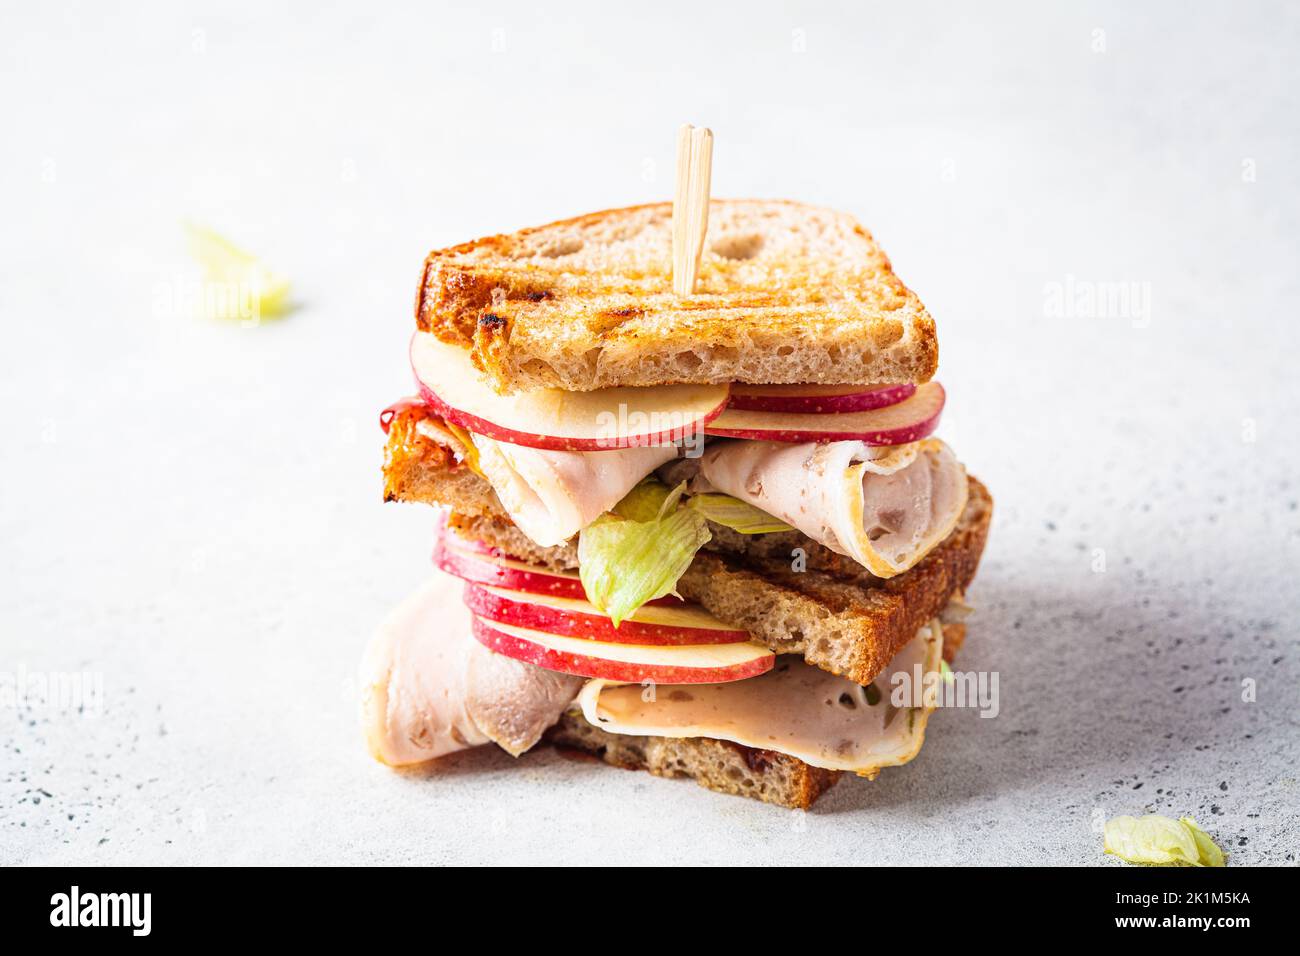 Turkey and apple sandwich, gray background, copy space. Thanksgiving leftovers concept. Stock Photo